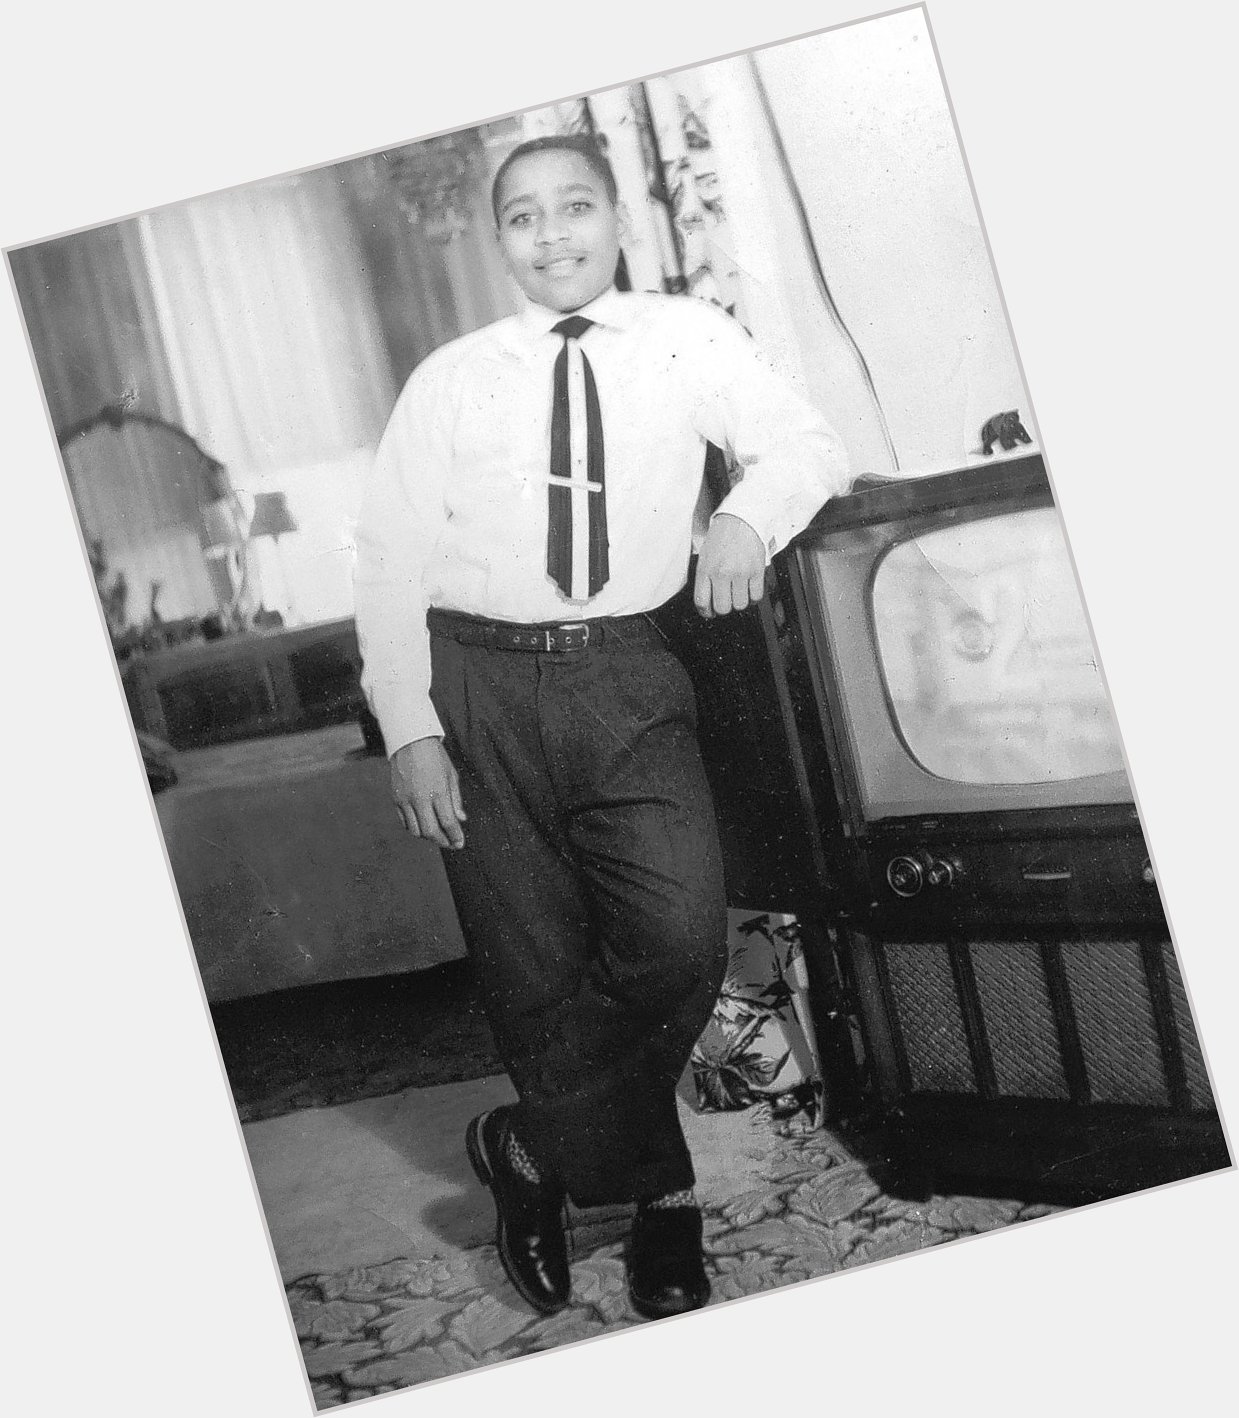 Happy Birthday, Emmett Till. He would have been 79 today. 